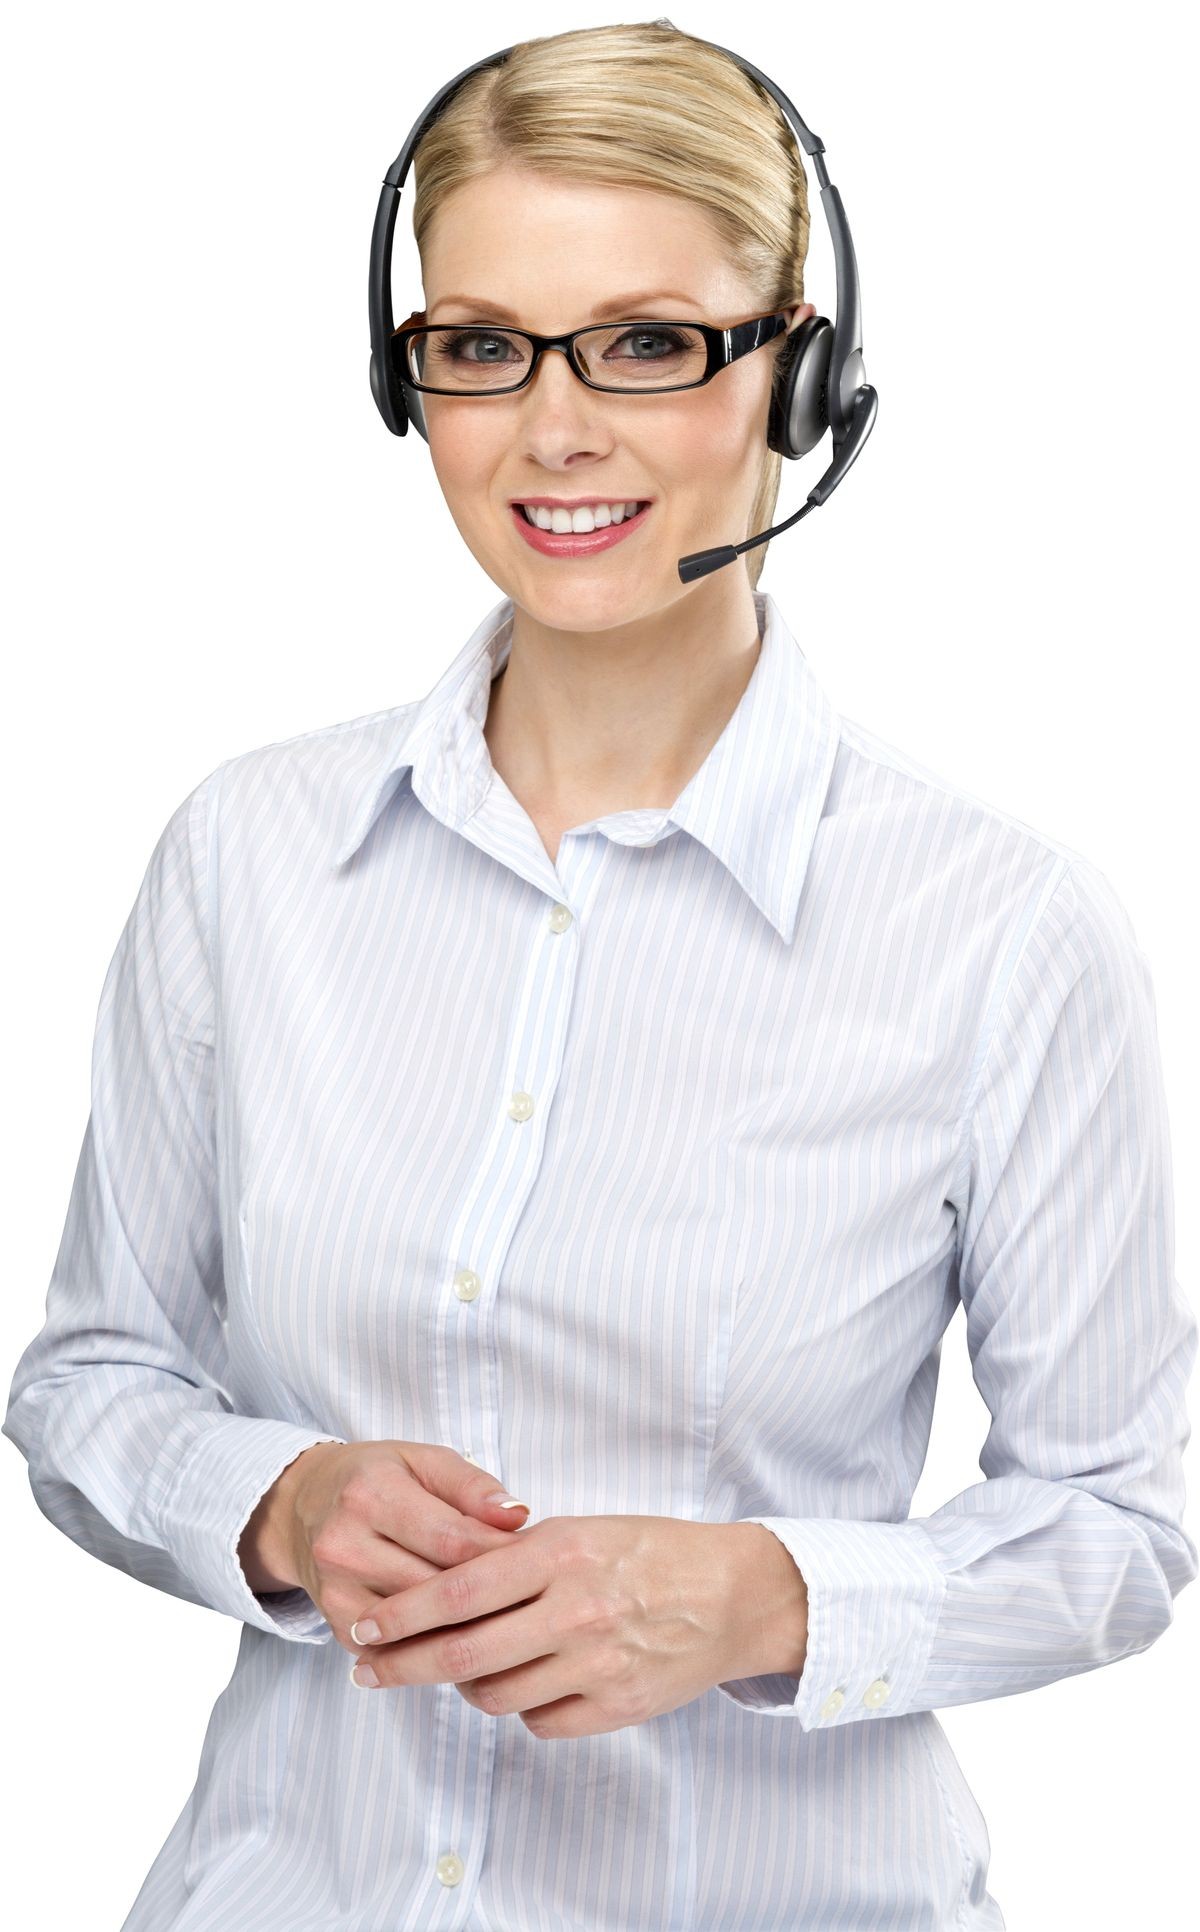 Friendly Caucasian woman with light blond hair in business casual outfit using headset - Isolated